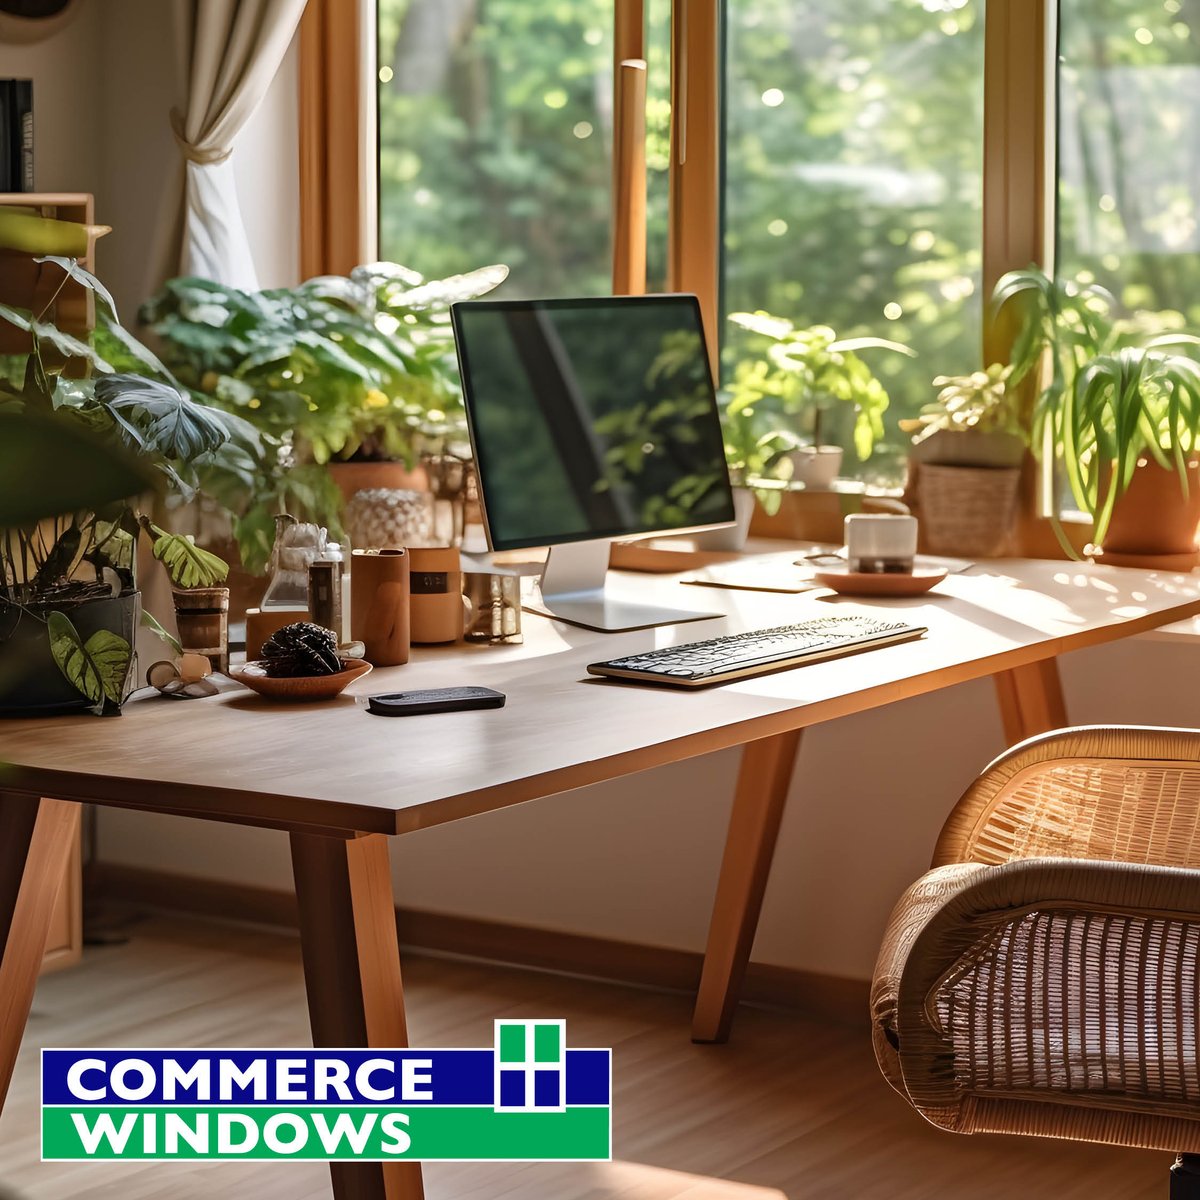 🌿 Green living starts at home, and we're here to help you make eco-conscious choices. 

With our sustainable materials and energy-efficient designs, let's build a better tomorrow together: commercewindows.co.uk 🌱

#GreenLiving #SustainableChoices #CommerceWindows